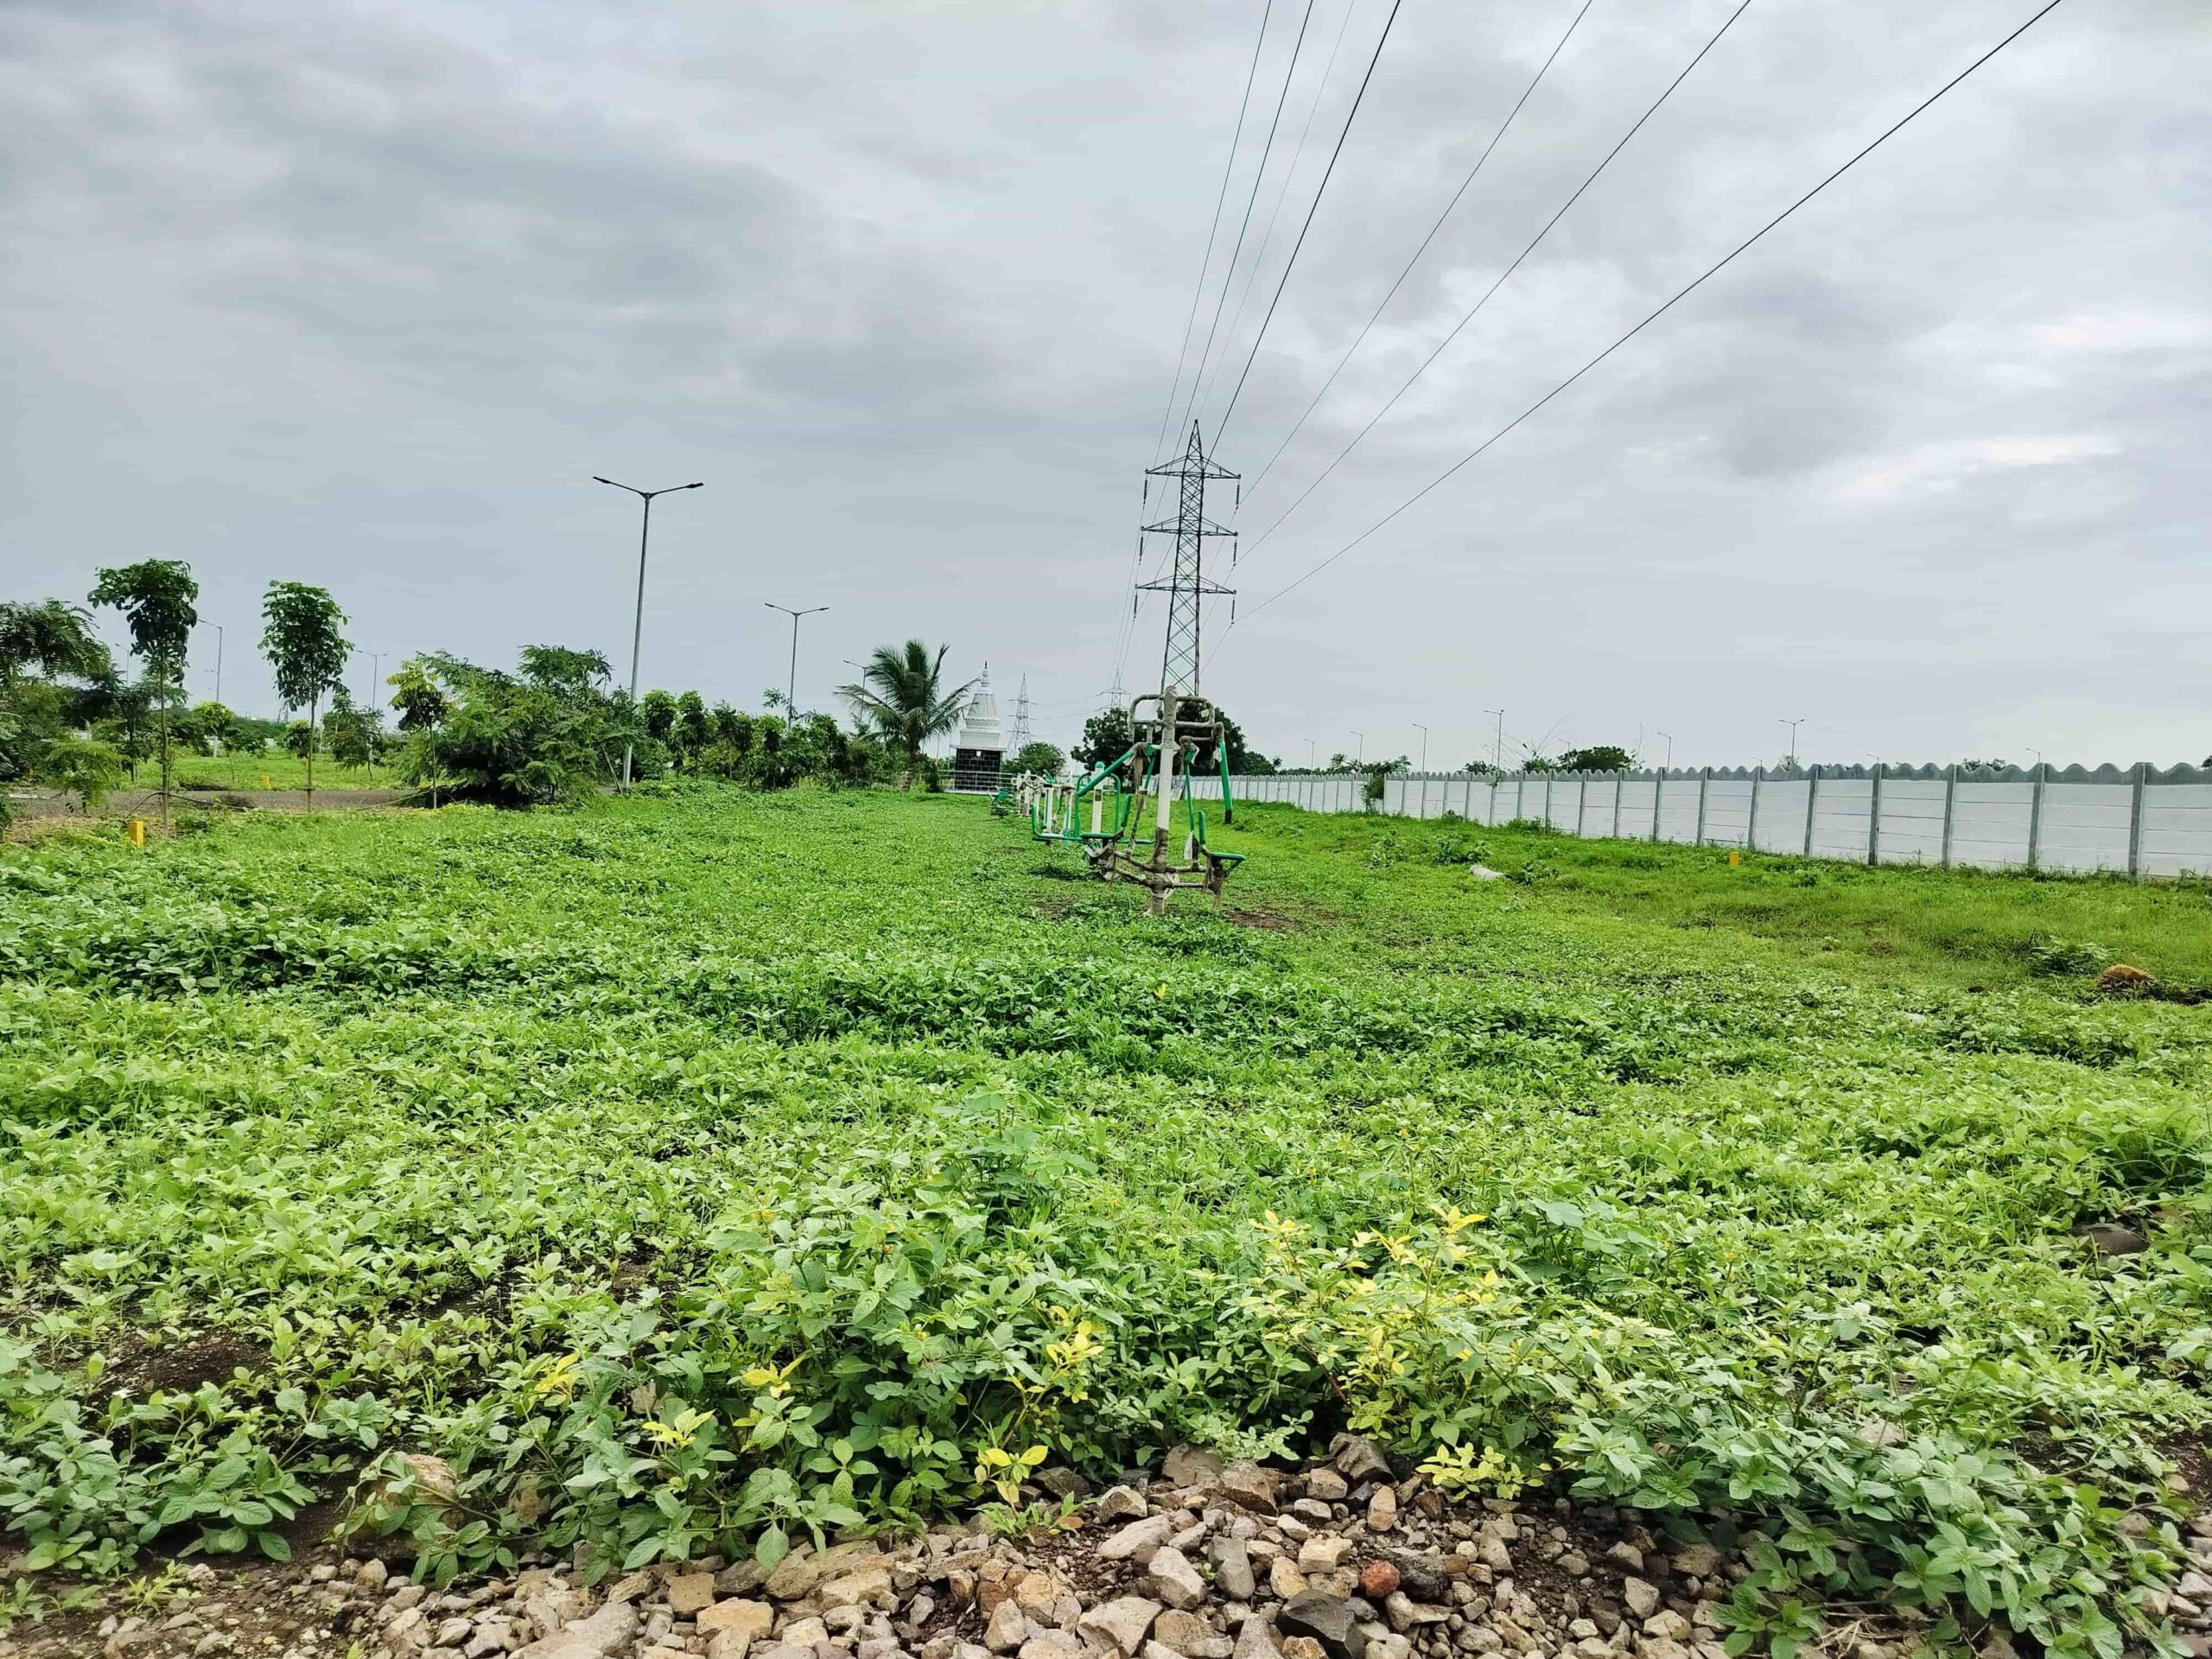 A field of plants with power lines in the background at Venkateshwara City in Vasant Vihar, Solapur. This image is from the website of solapur property, a real estate company in Solapur